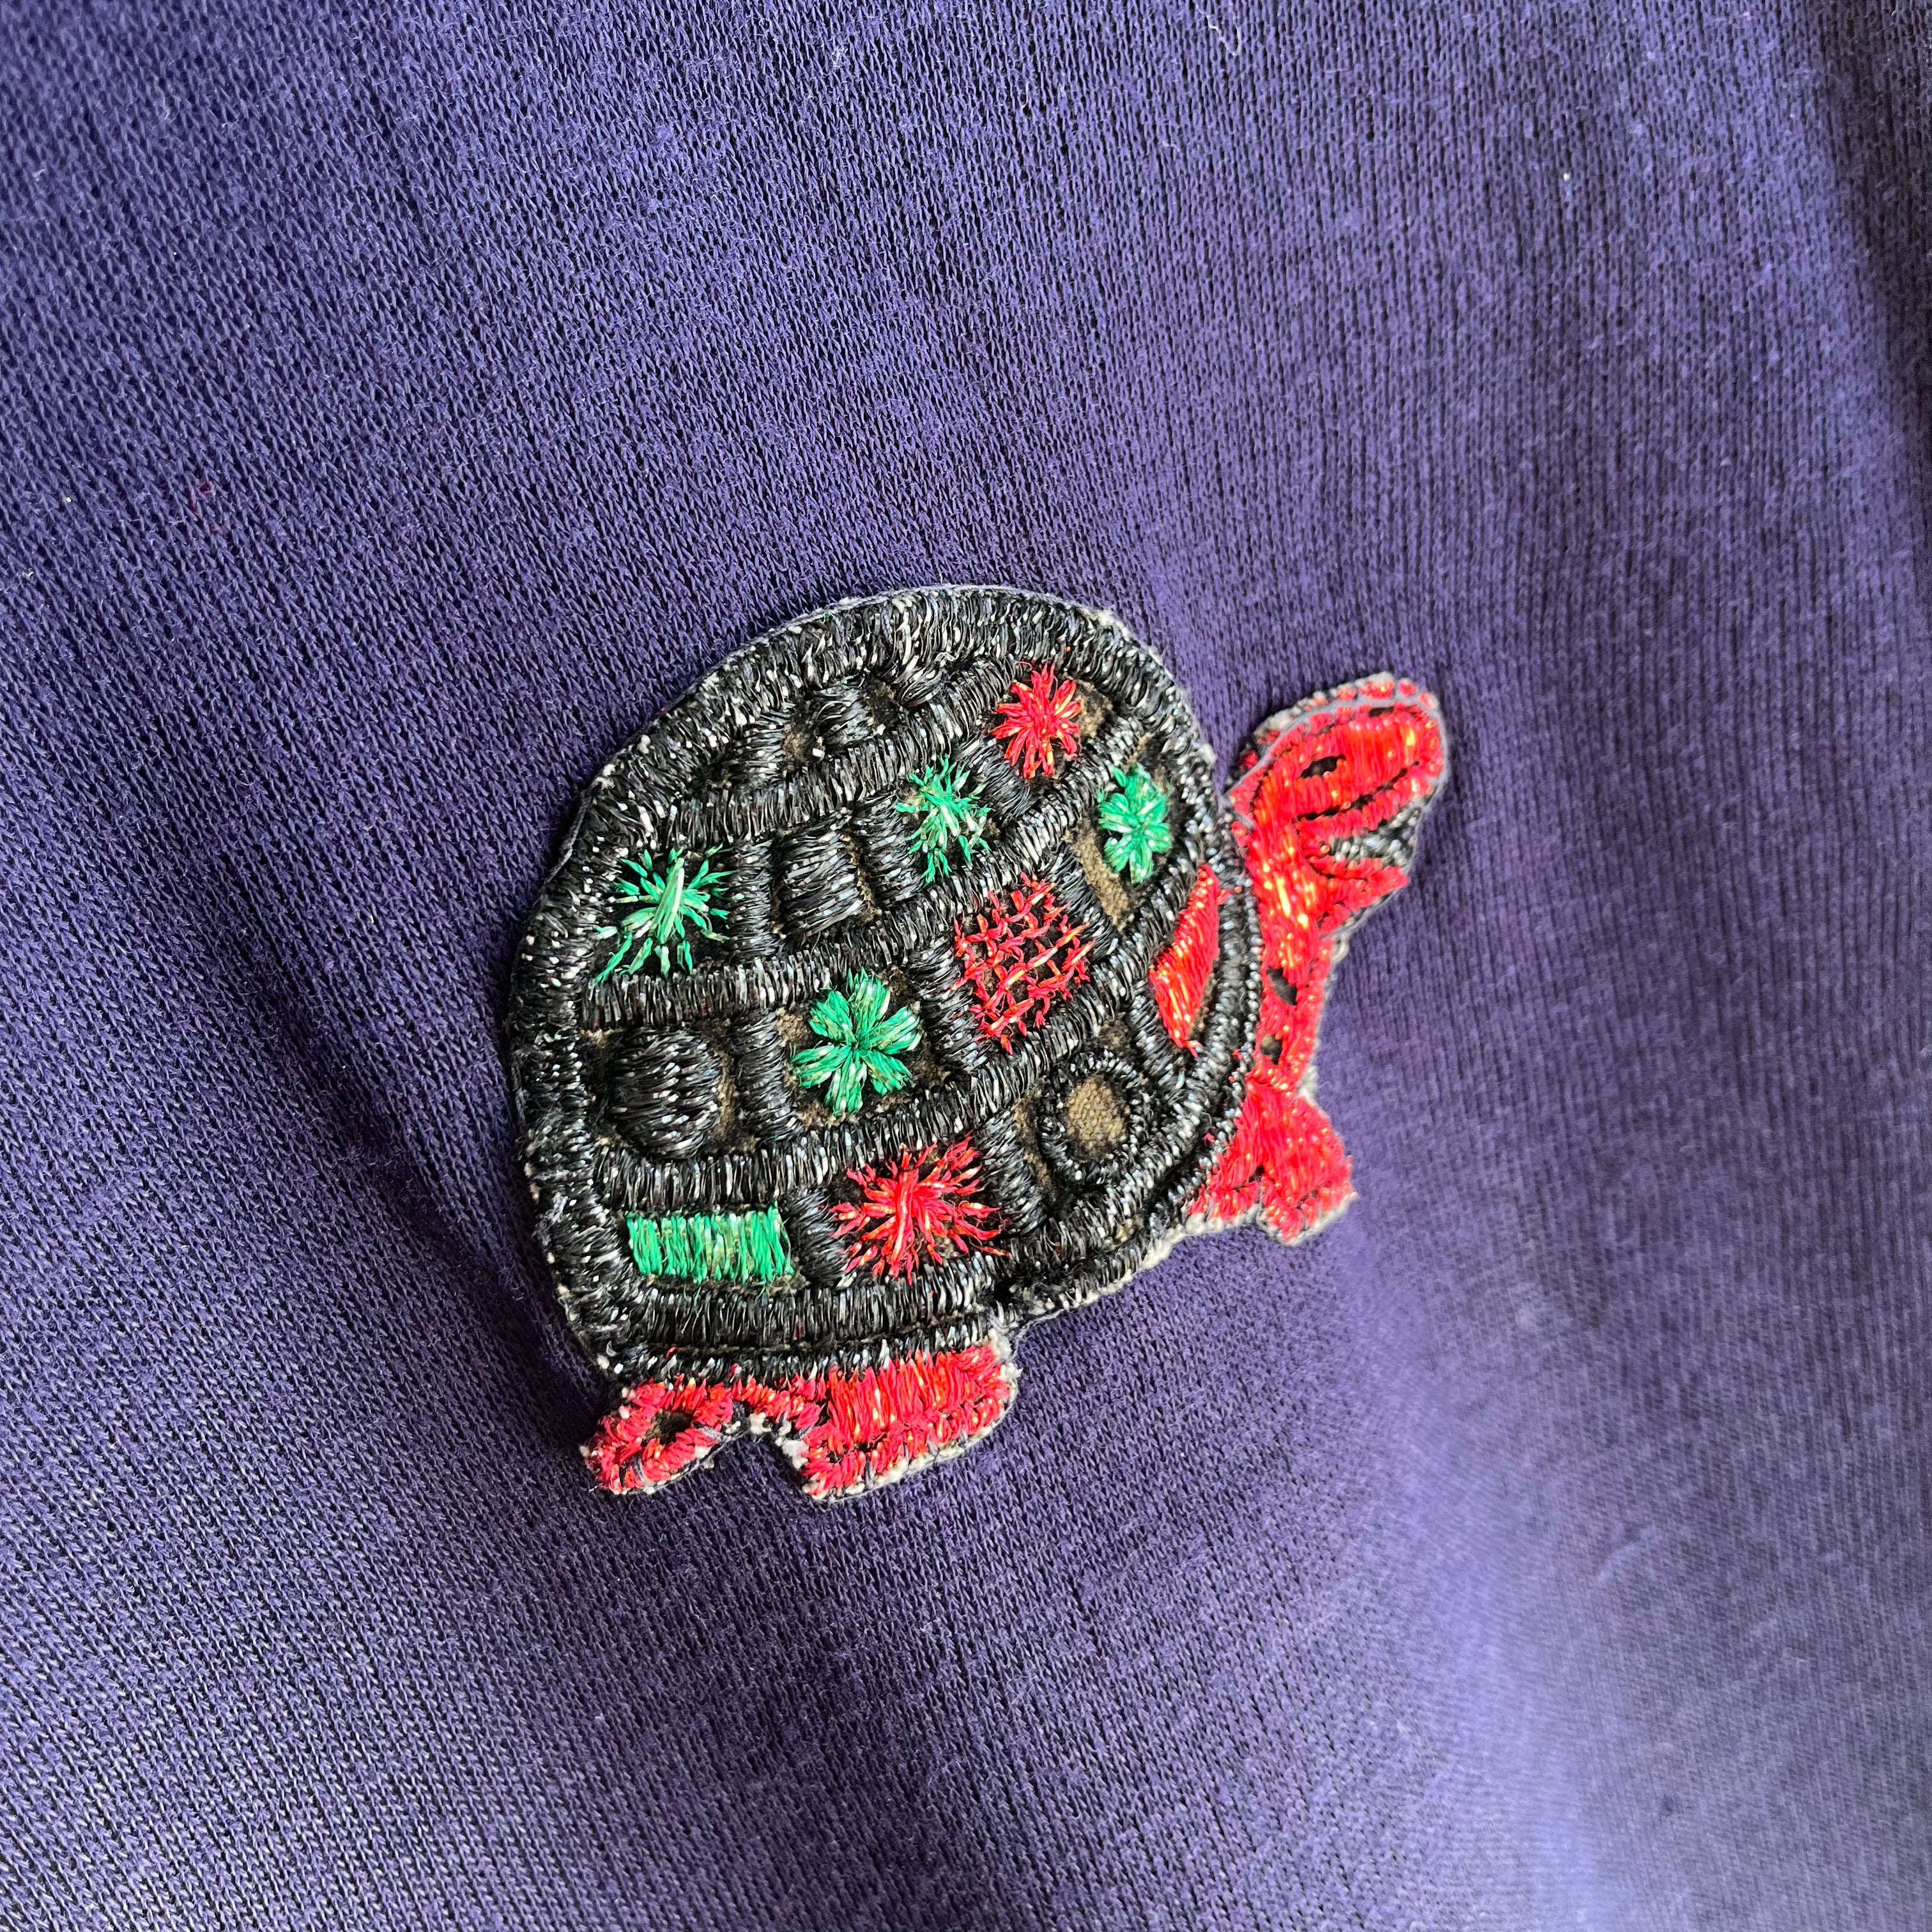 1980s Turtle Ranglan with a hint of Sparkle